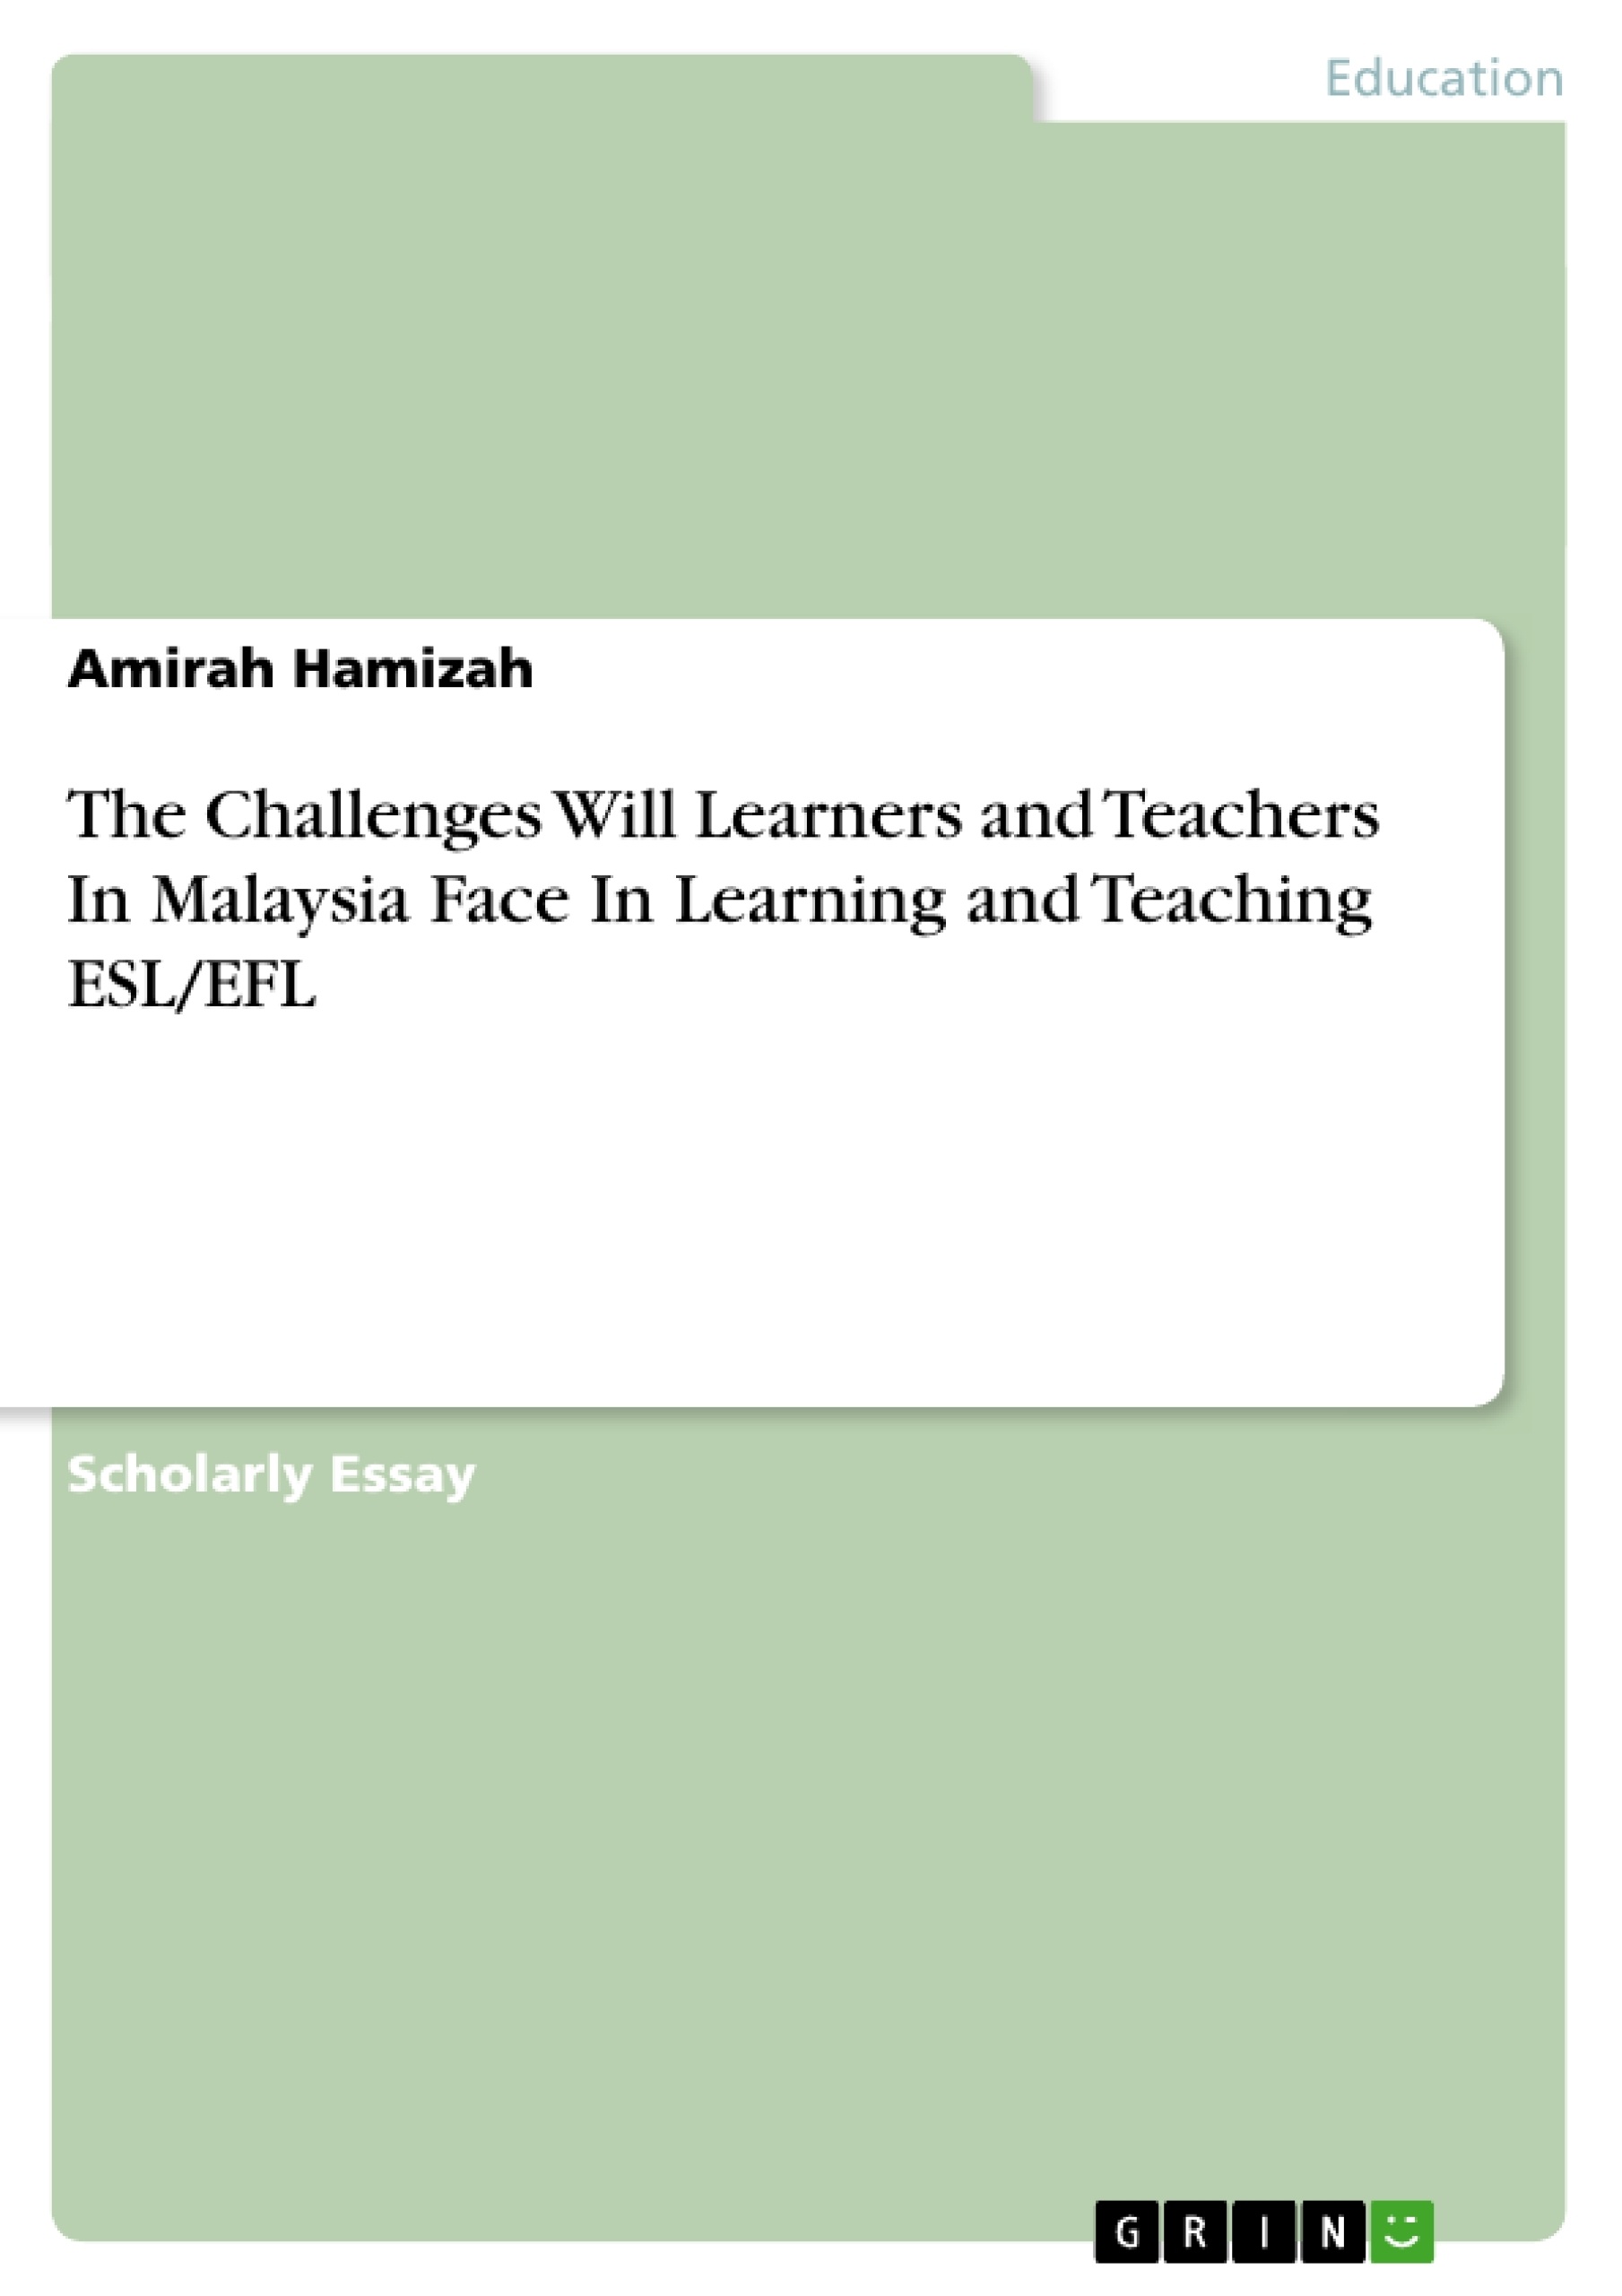 Title: The Challenges Will Learners and Teachers In Malaysia Face In Learning and Teaching ESL/EFL